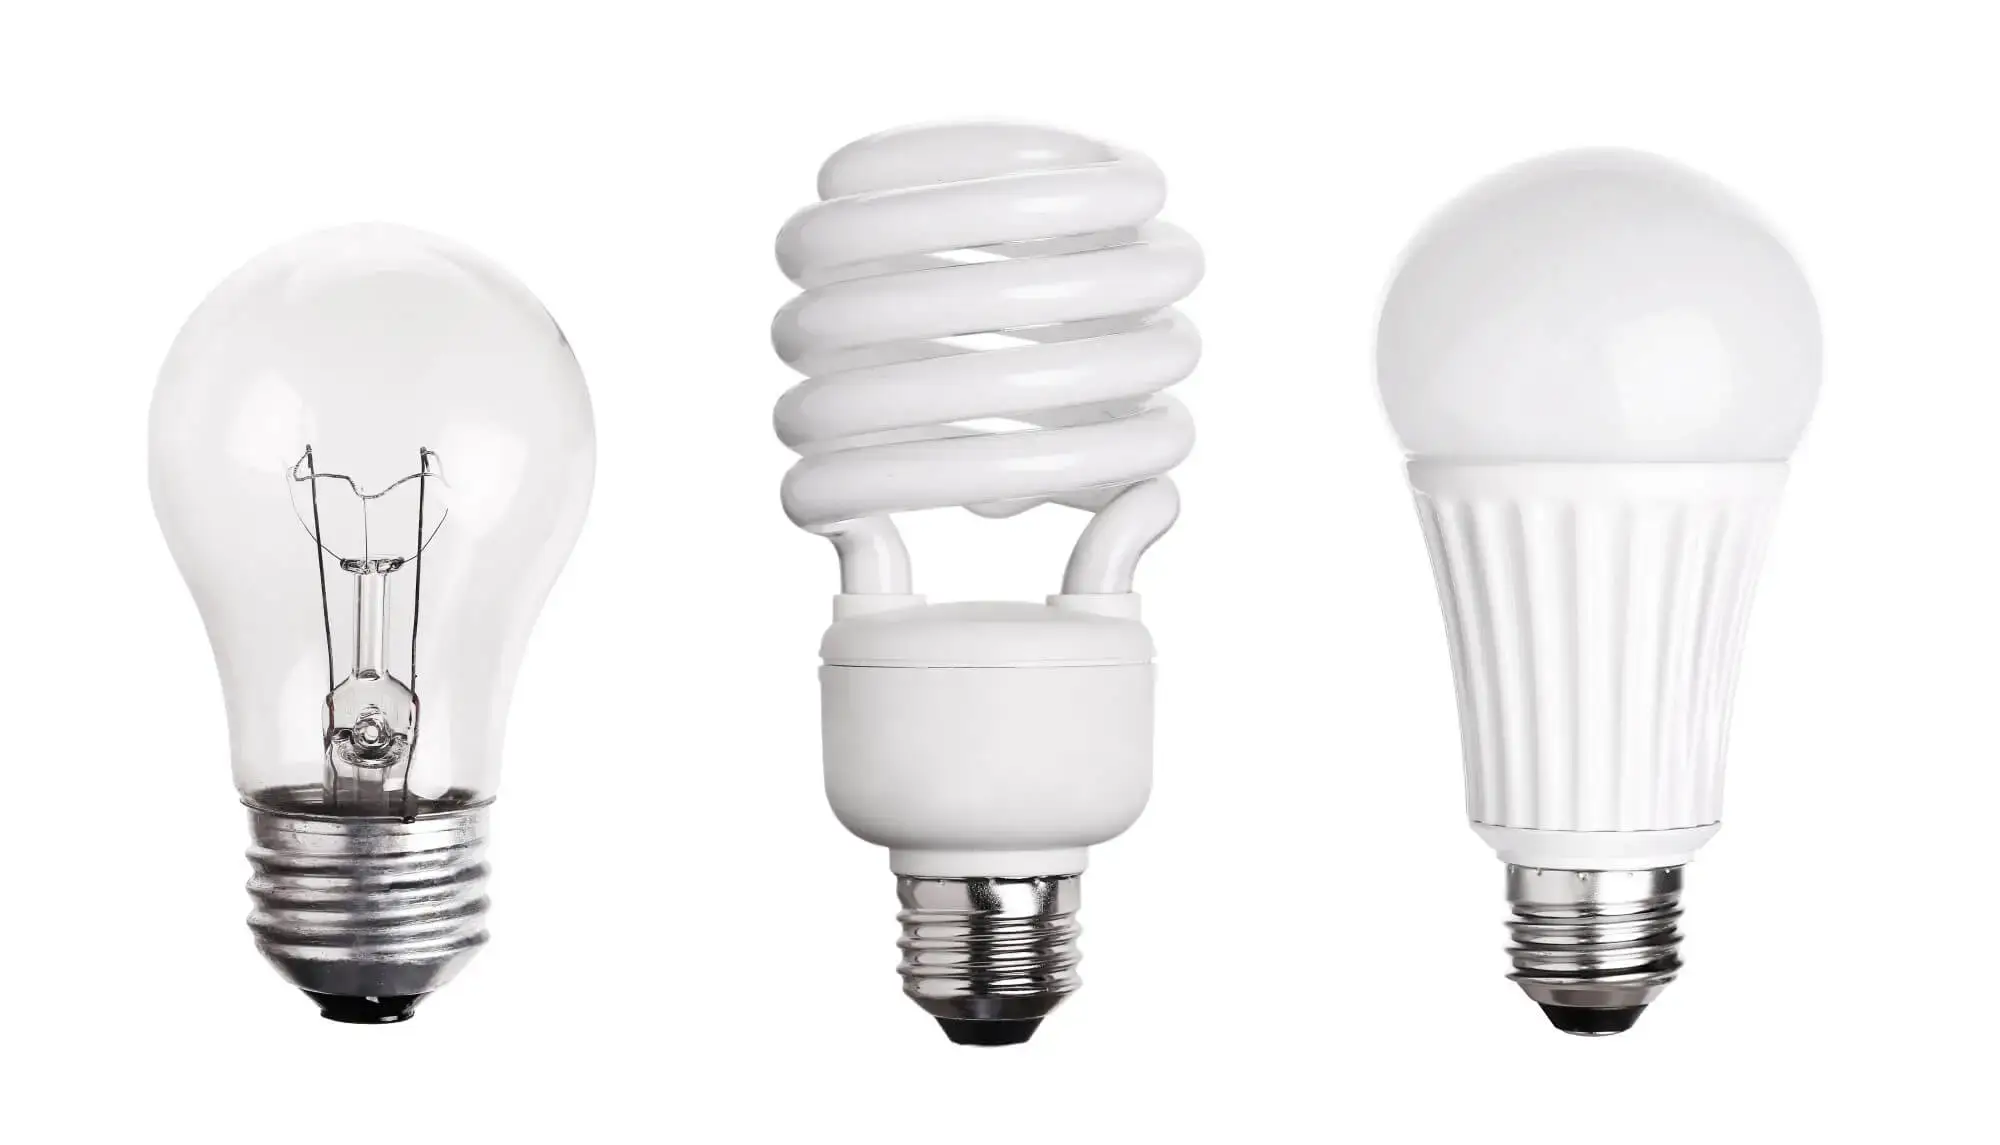 The Different Kinds of Light Bulbs Explained